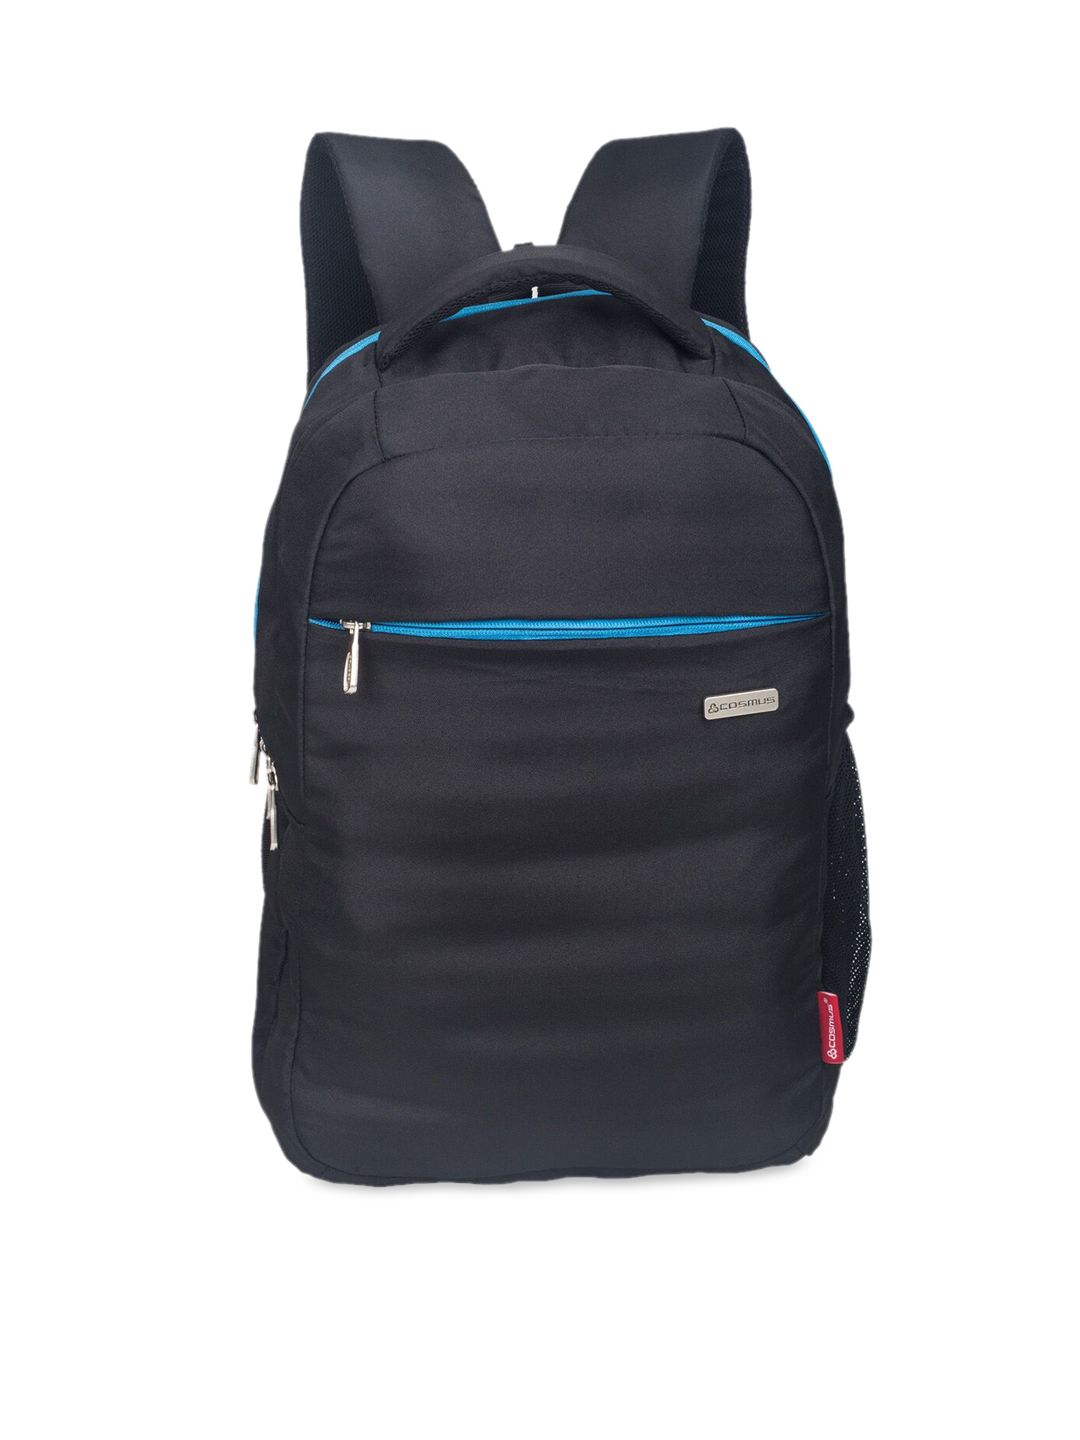 COSMUS Black Solid Laptop Backpack Price in India